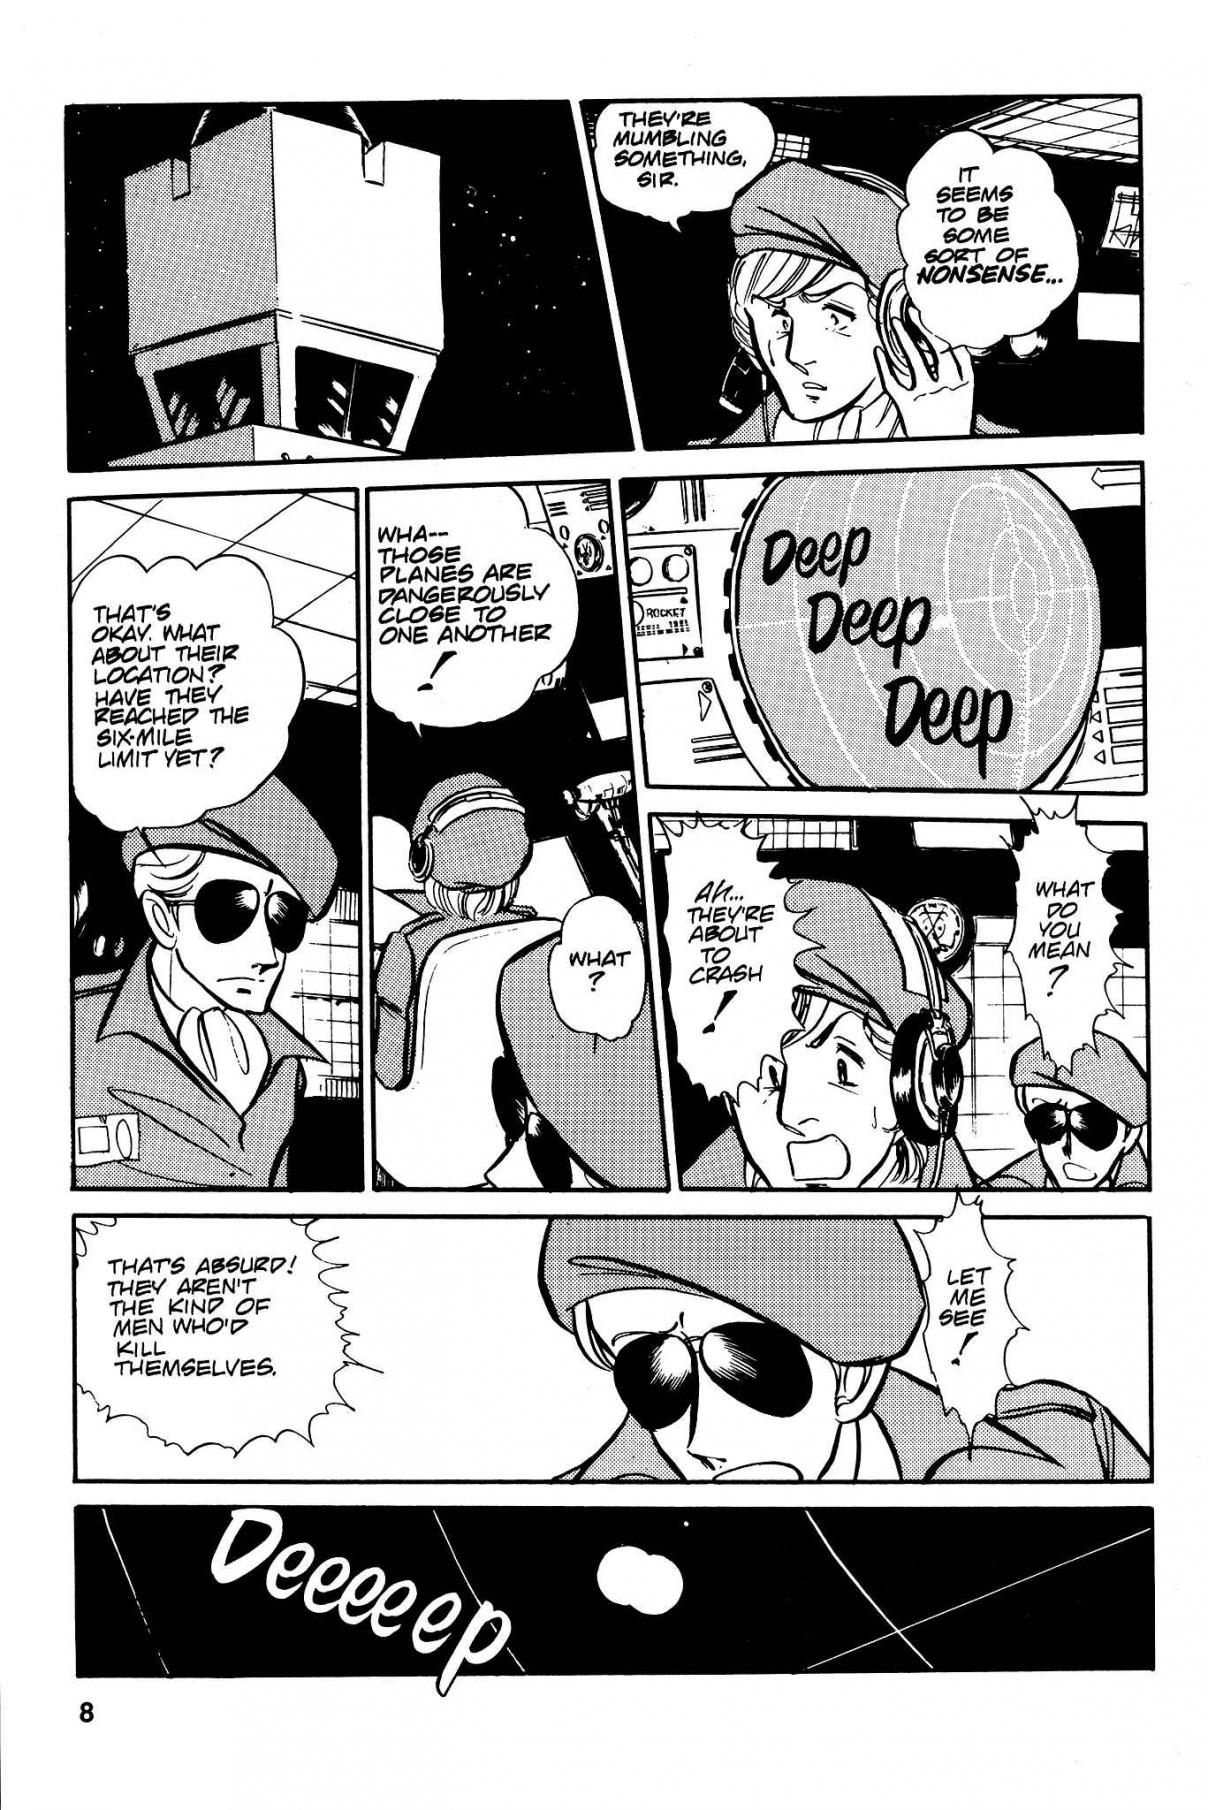 Area 88 Vol. 3 Ch. 35 The Dark Cloud of Intrigue